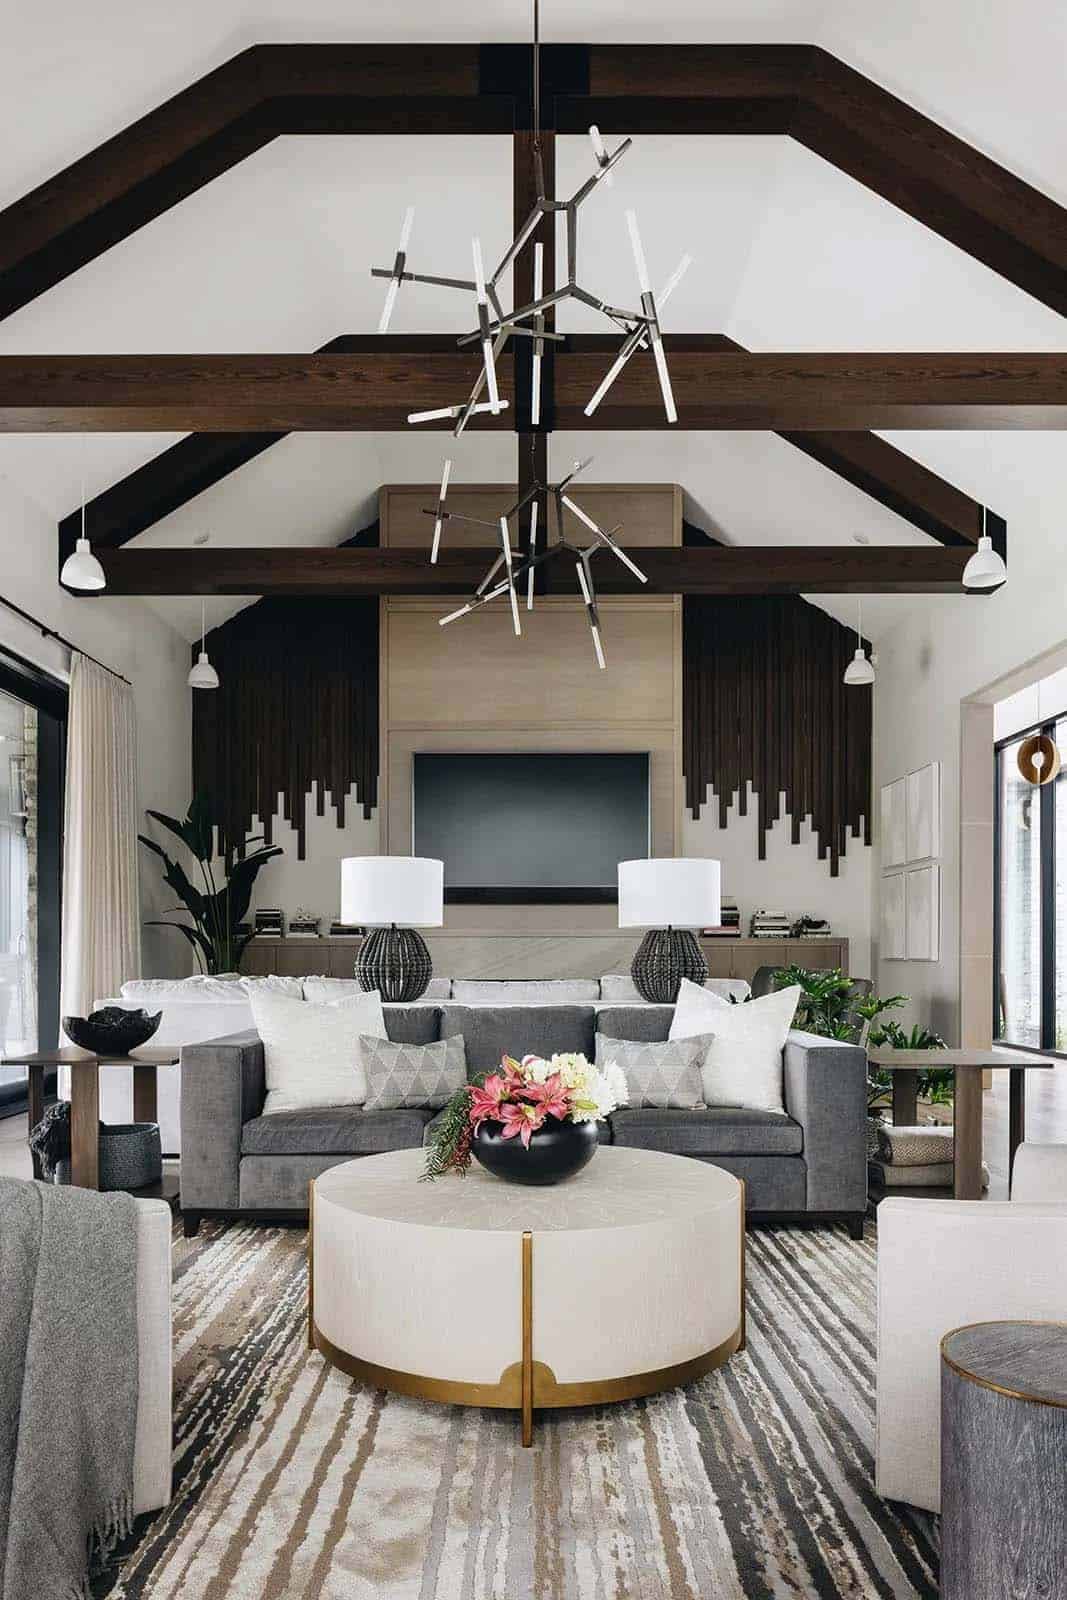 transitional style living room with ceiling trusses